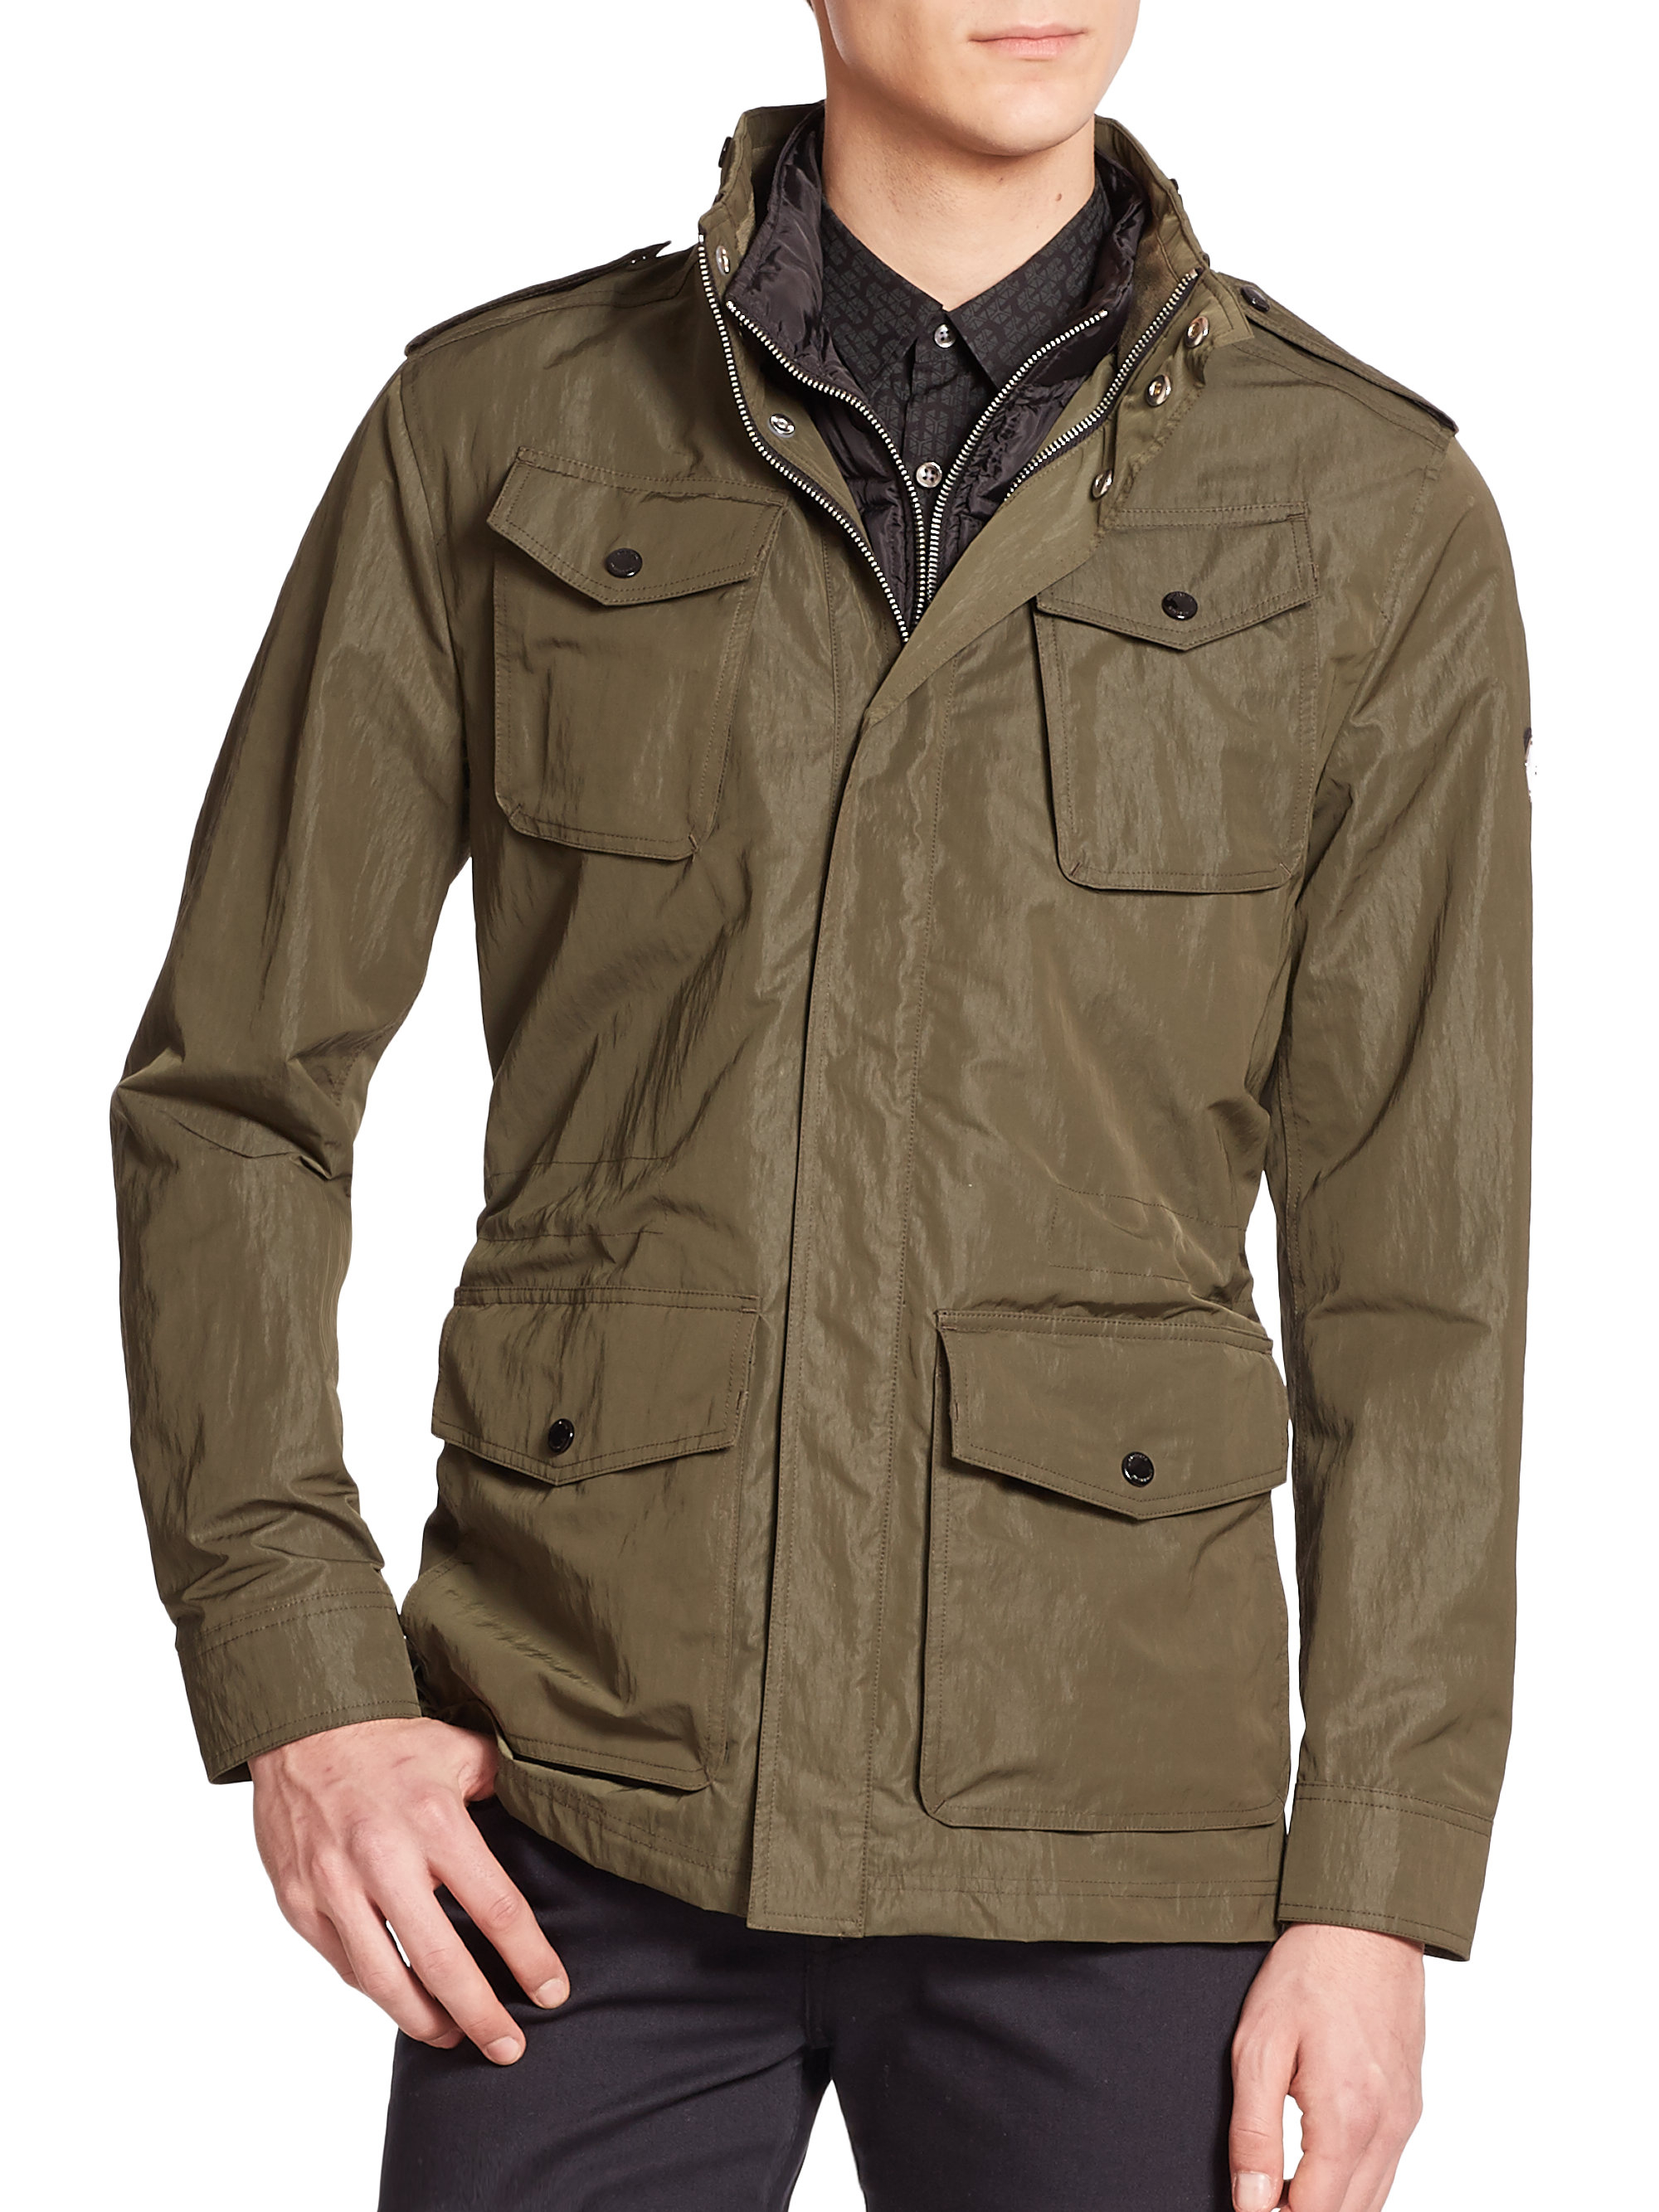 Lyst - J.lindeberg Water-repellent Military Jacket in Green for Men